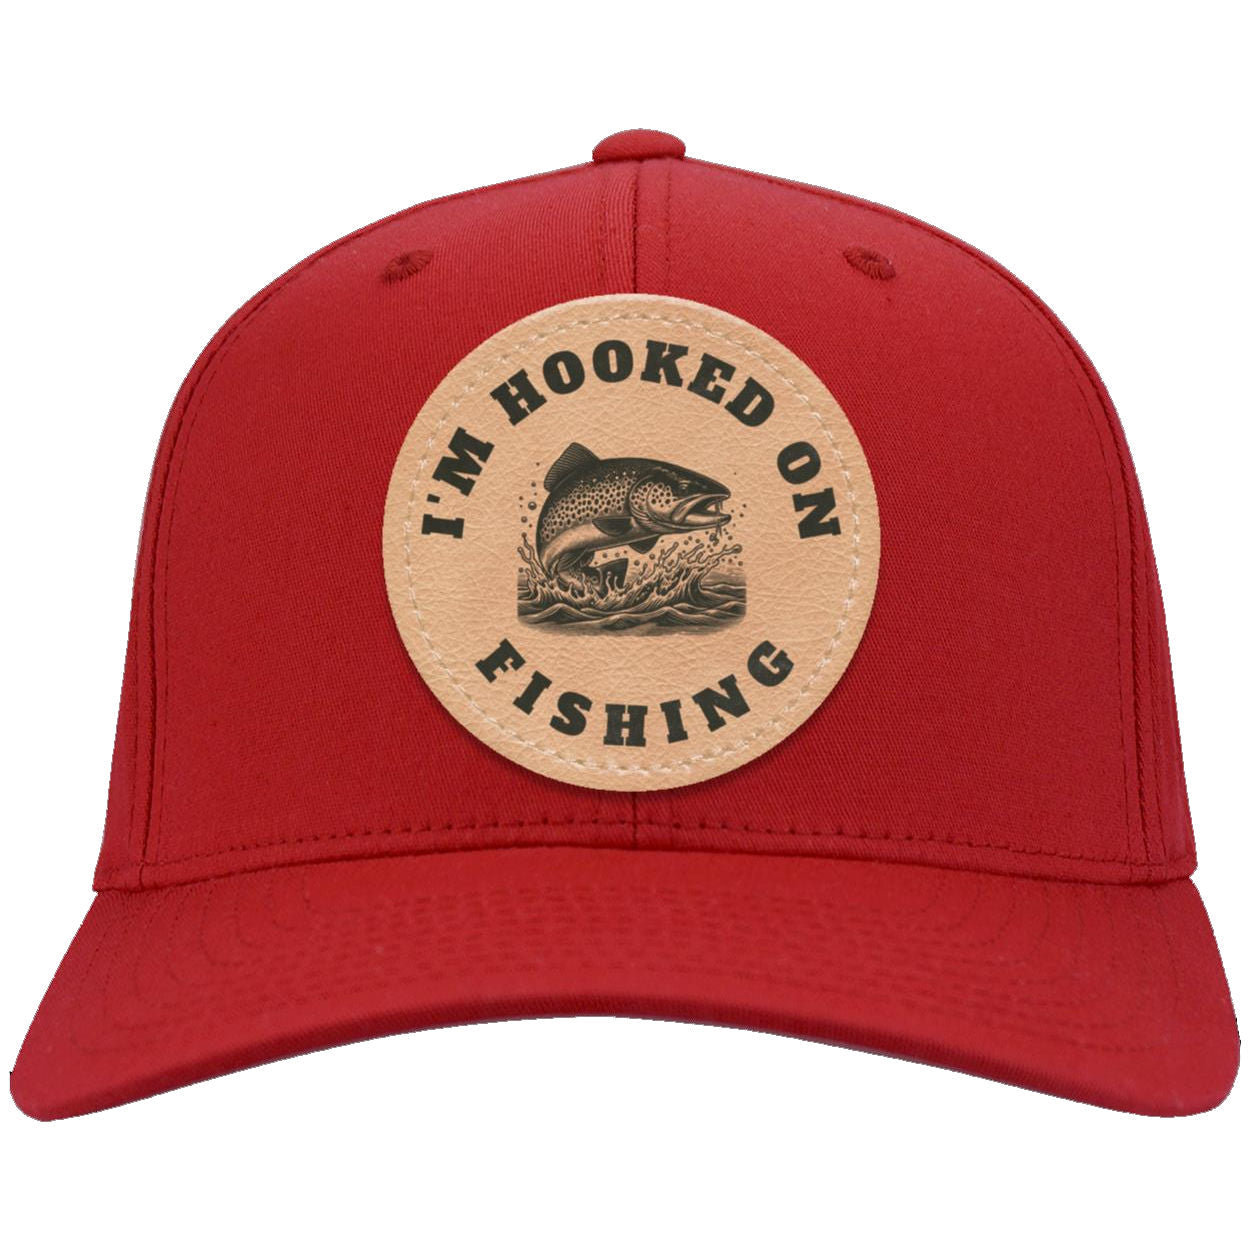 I'm Hooked on Fishing Twill Cap k red